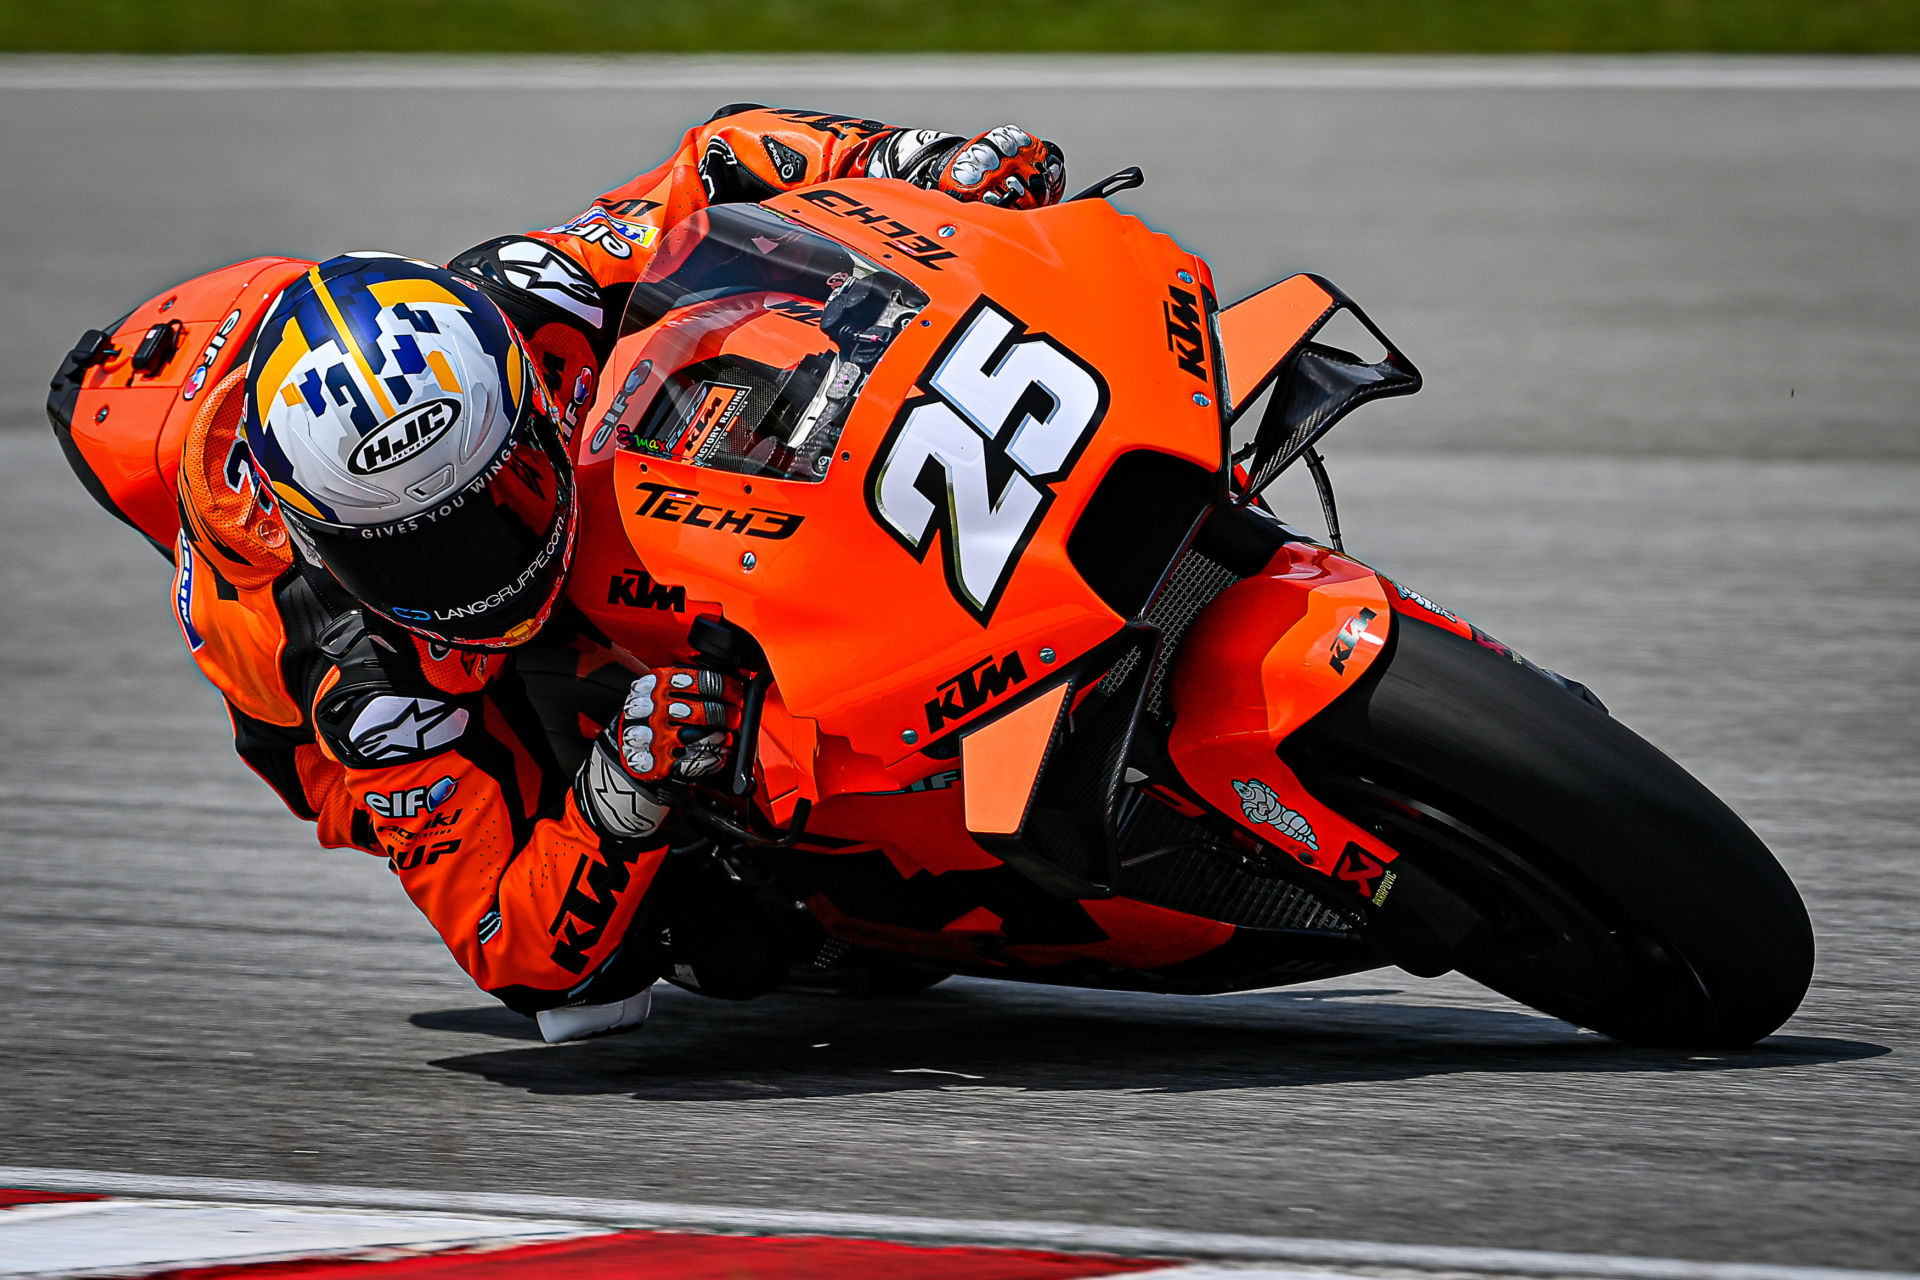 Raul Fernandez (25) was one of five rookies and several test riders on track Monday at Sepang International Circuit for the MotoGP shakedown test. Photo courtesy Dorna.